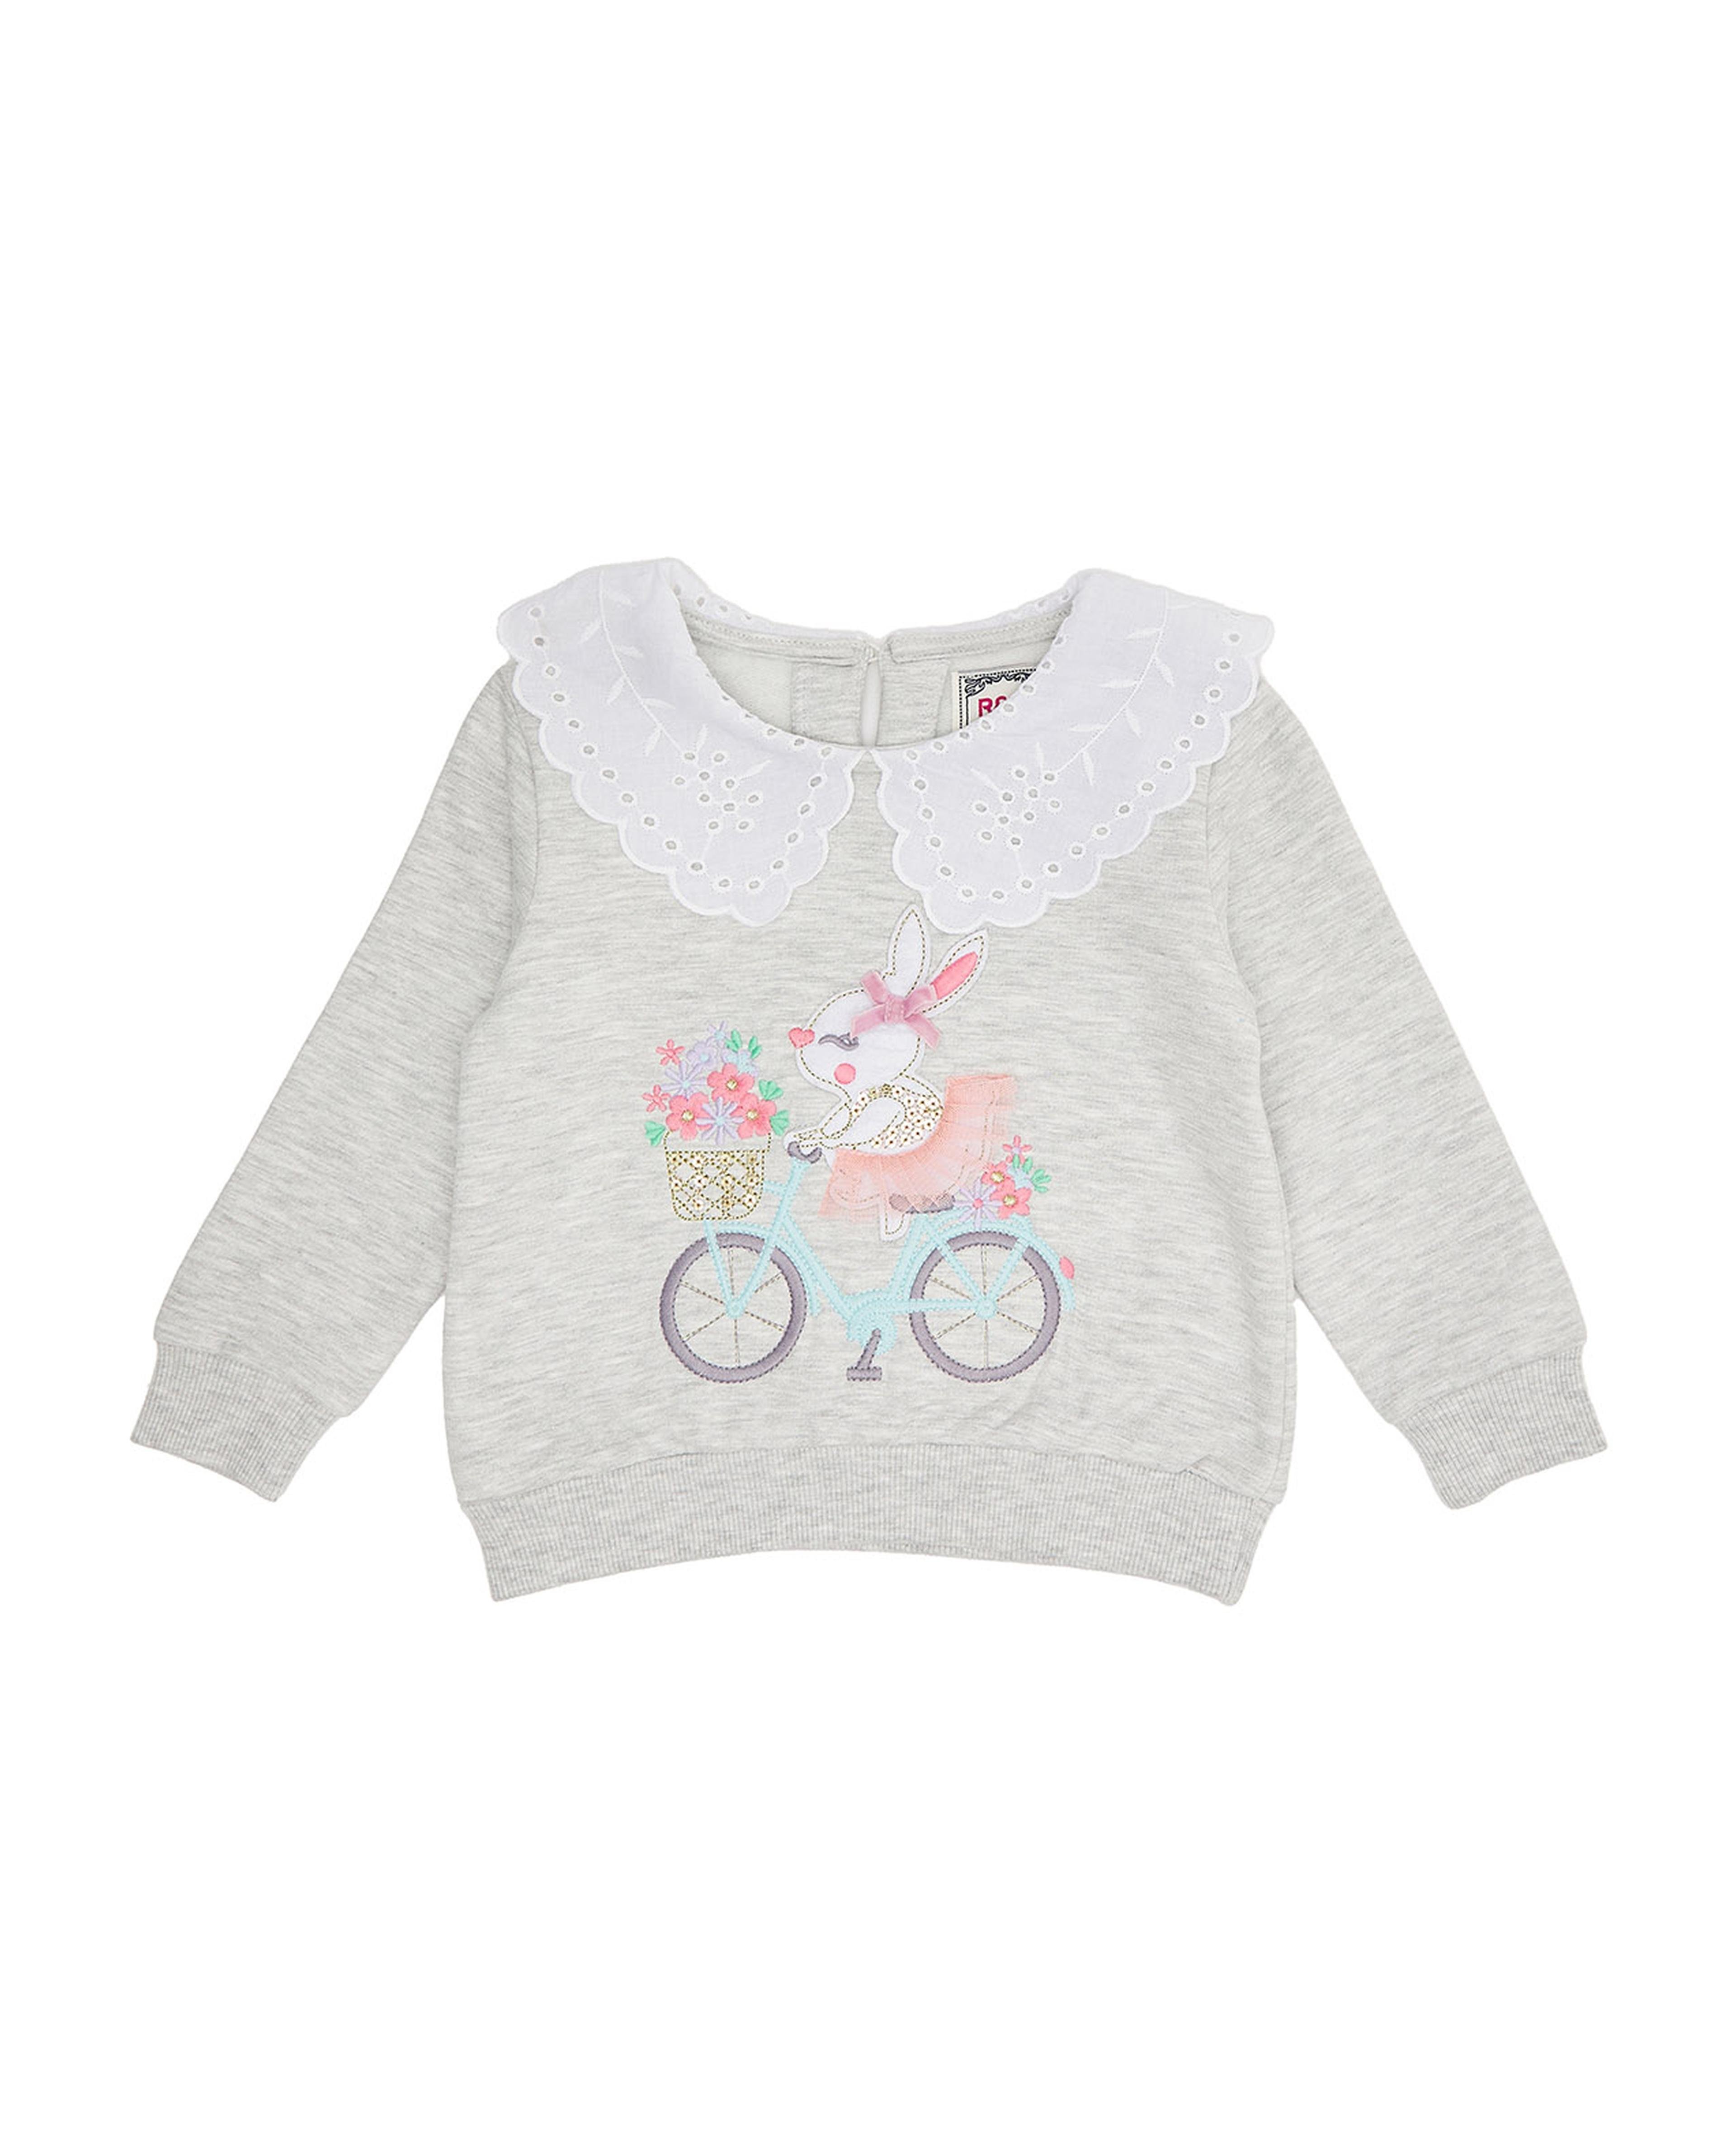 Sequined Sweatshirt with Peter Pan Collar and Long Sleeves